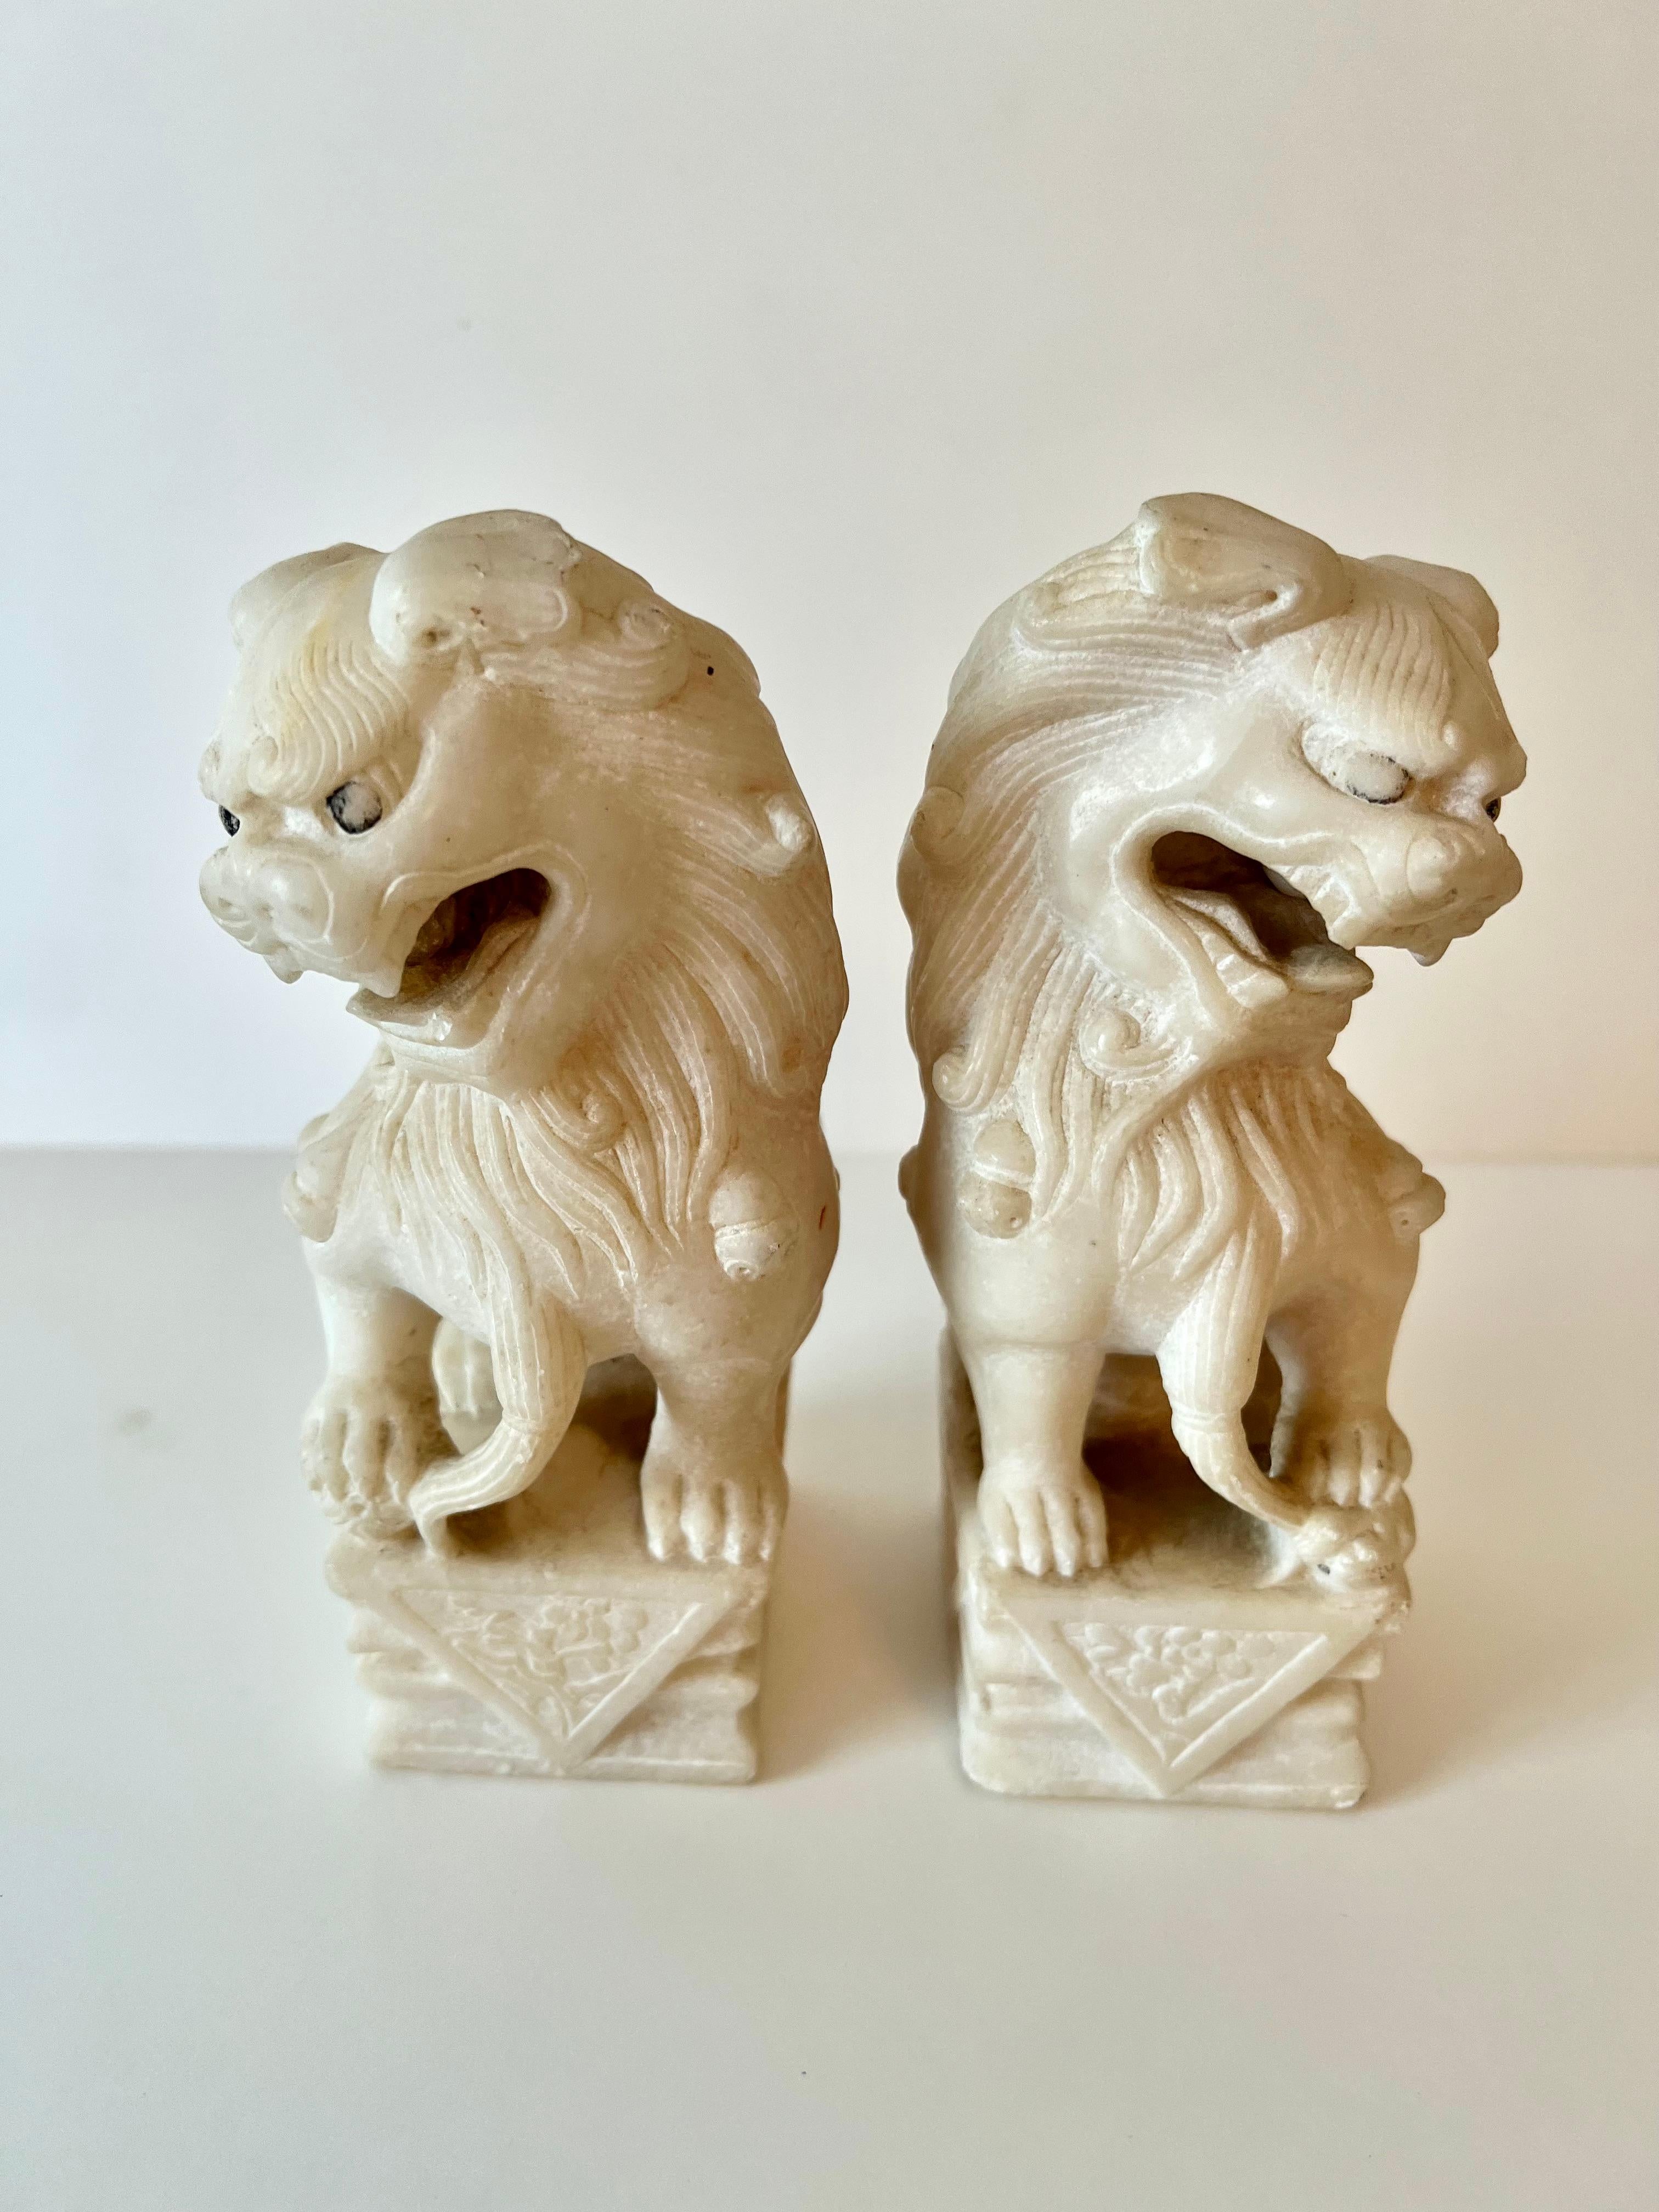 Pair of Vintage Foo Dogs made of Marble - both are of nice weight and can also serve as either bookends, or paperweights.

The age and years of use they have done well, but have some lovely patination as well.